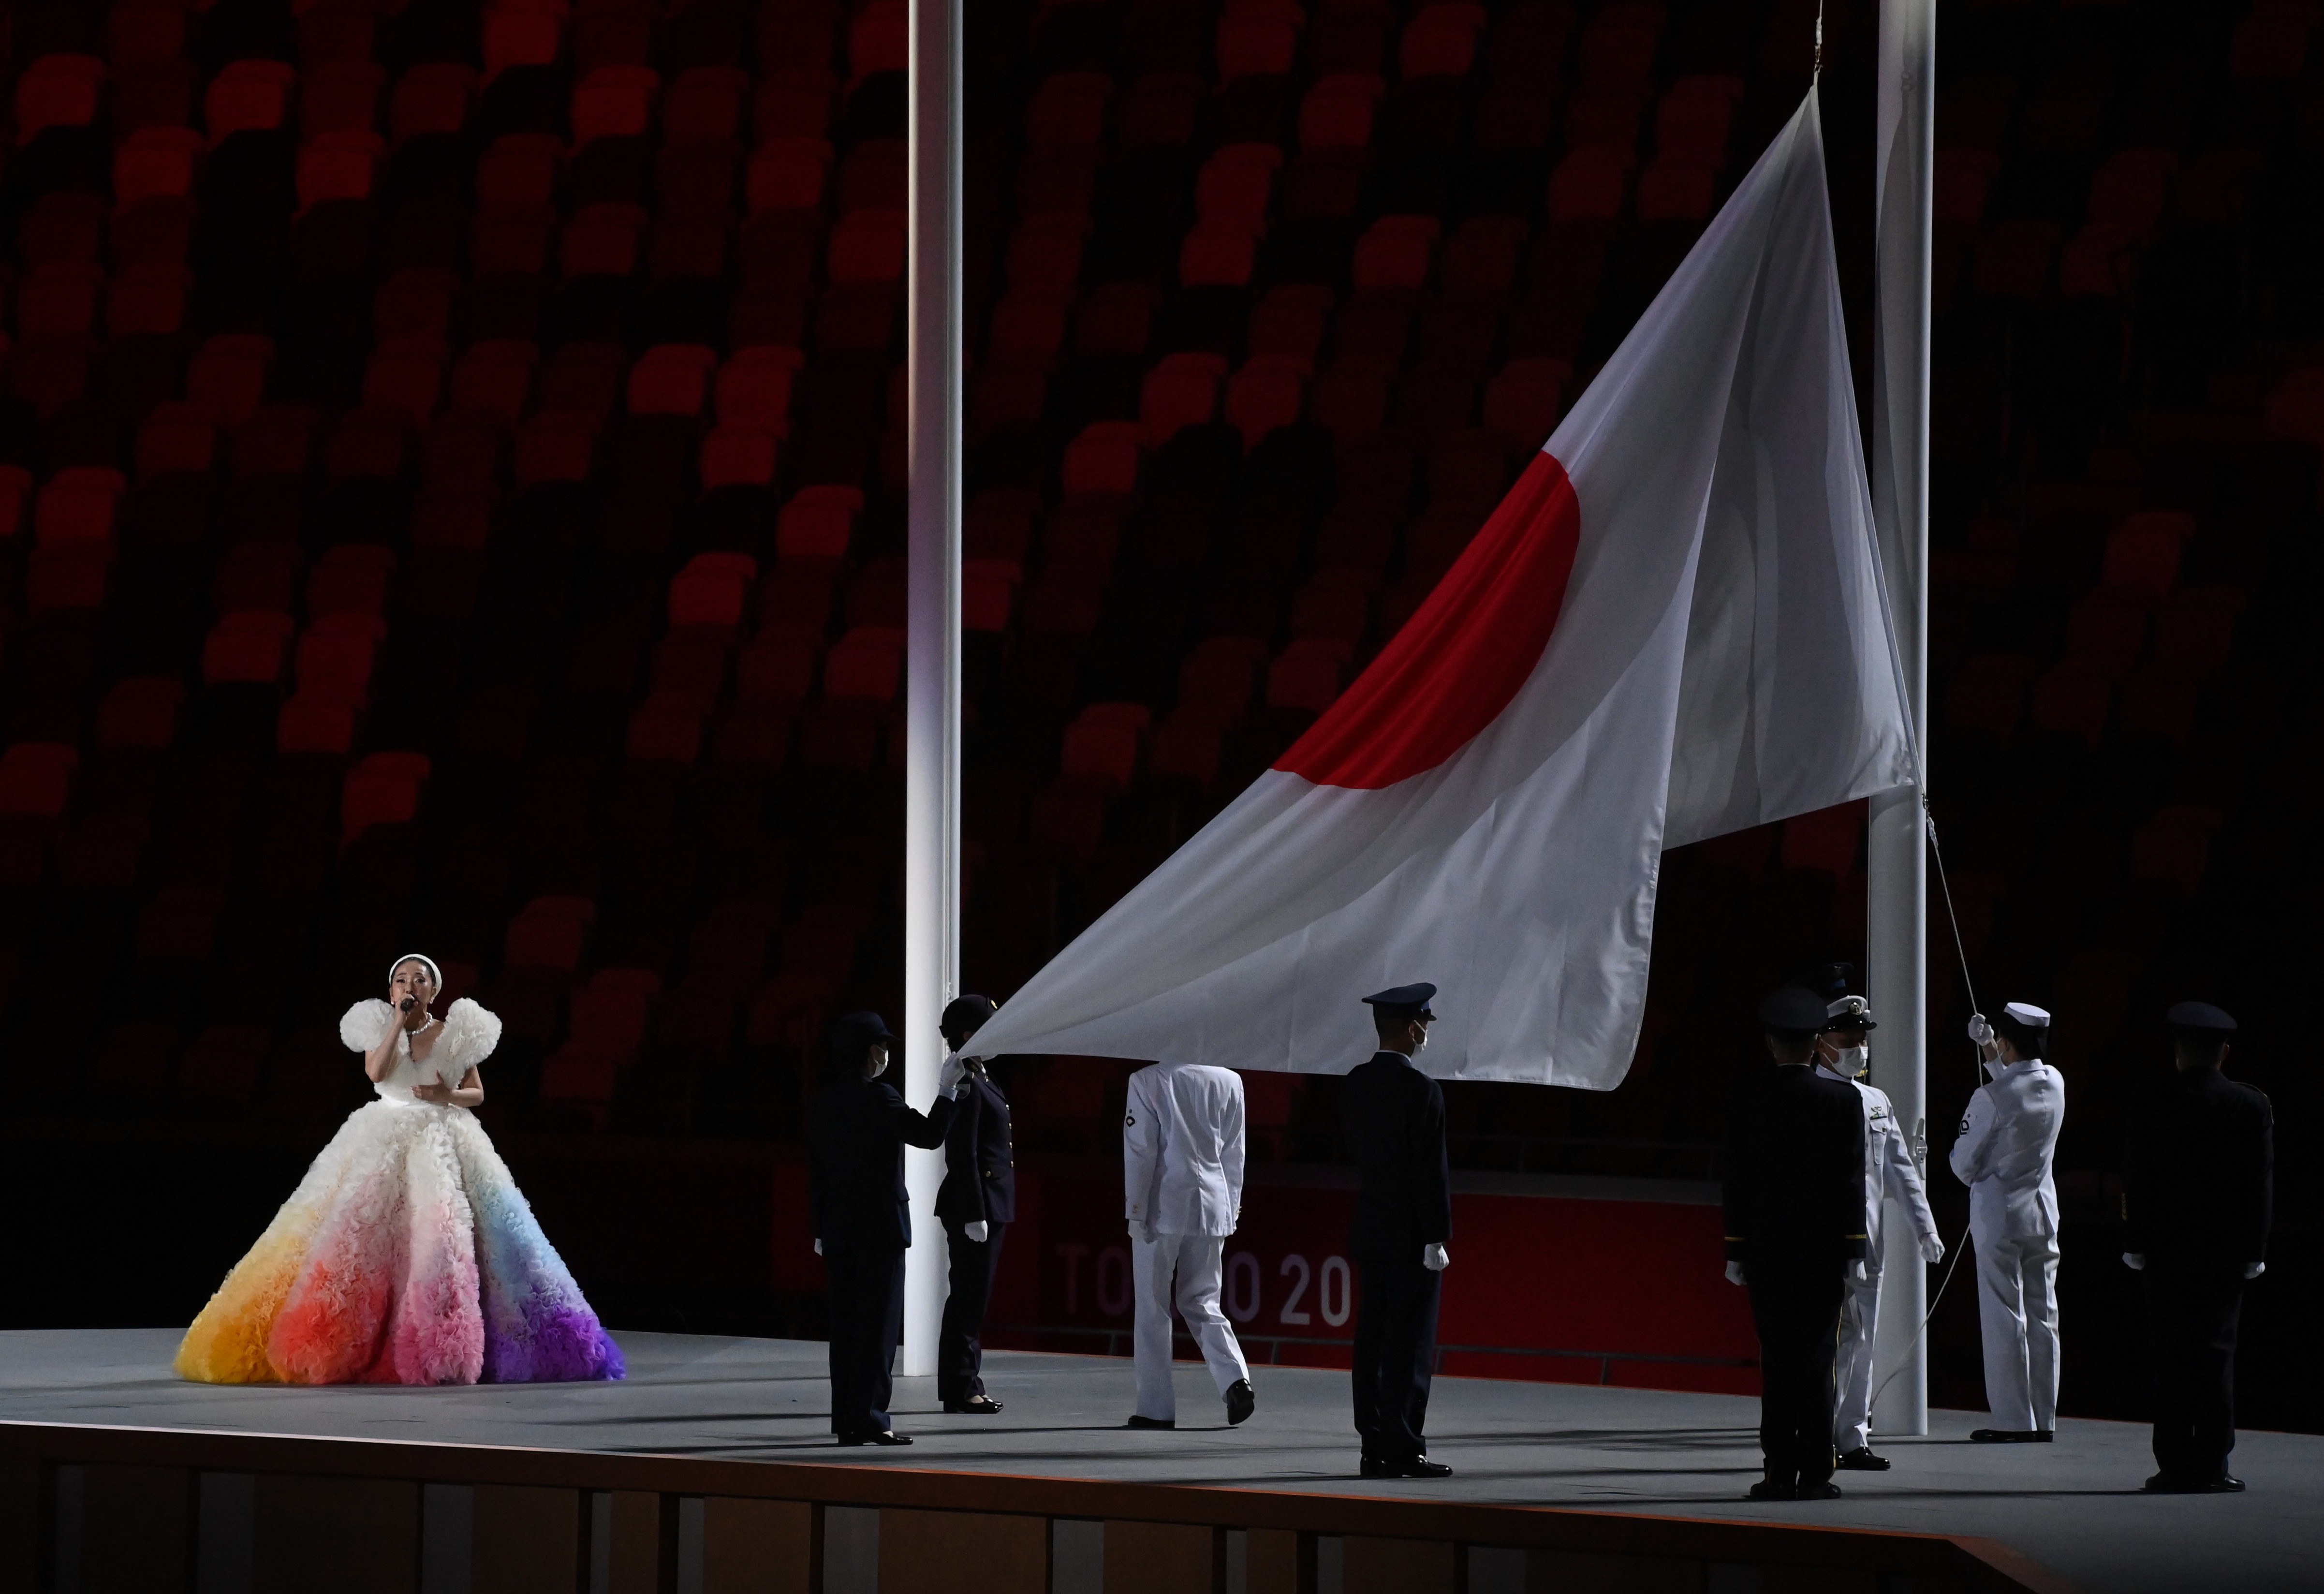 dpatop - 23 July 2021, Japan, Tokio: Olympics: Opening ceremony at the Olympic Stadium. Singer Misa sings the national anthem. Photo: Sebastian Gollnow/dpa (Photo by Sebastian Gollnow/picture alliance via Getty Images) (Foto: dpa/picture alliance via Getty I)